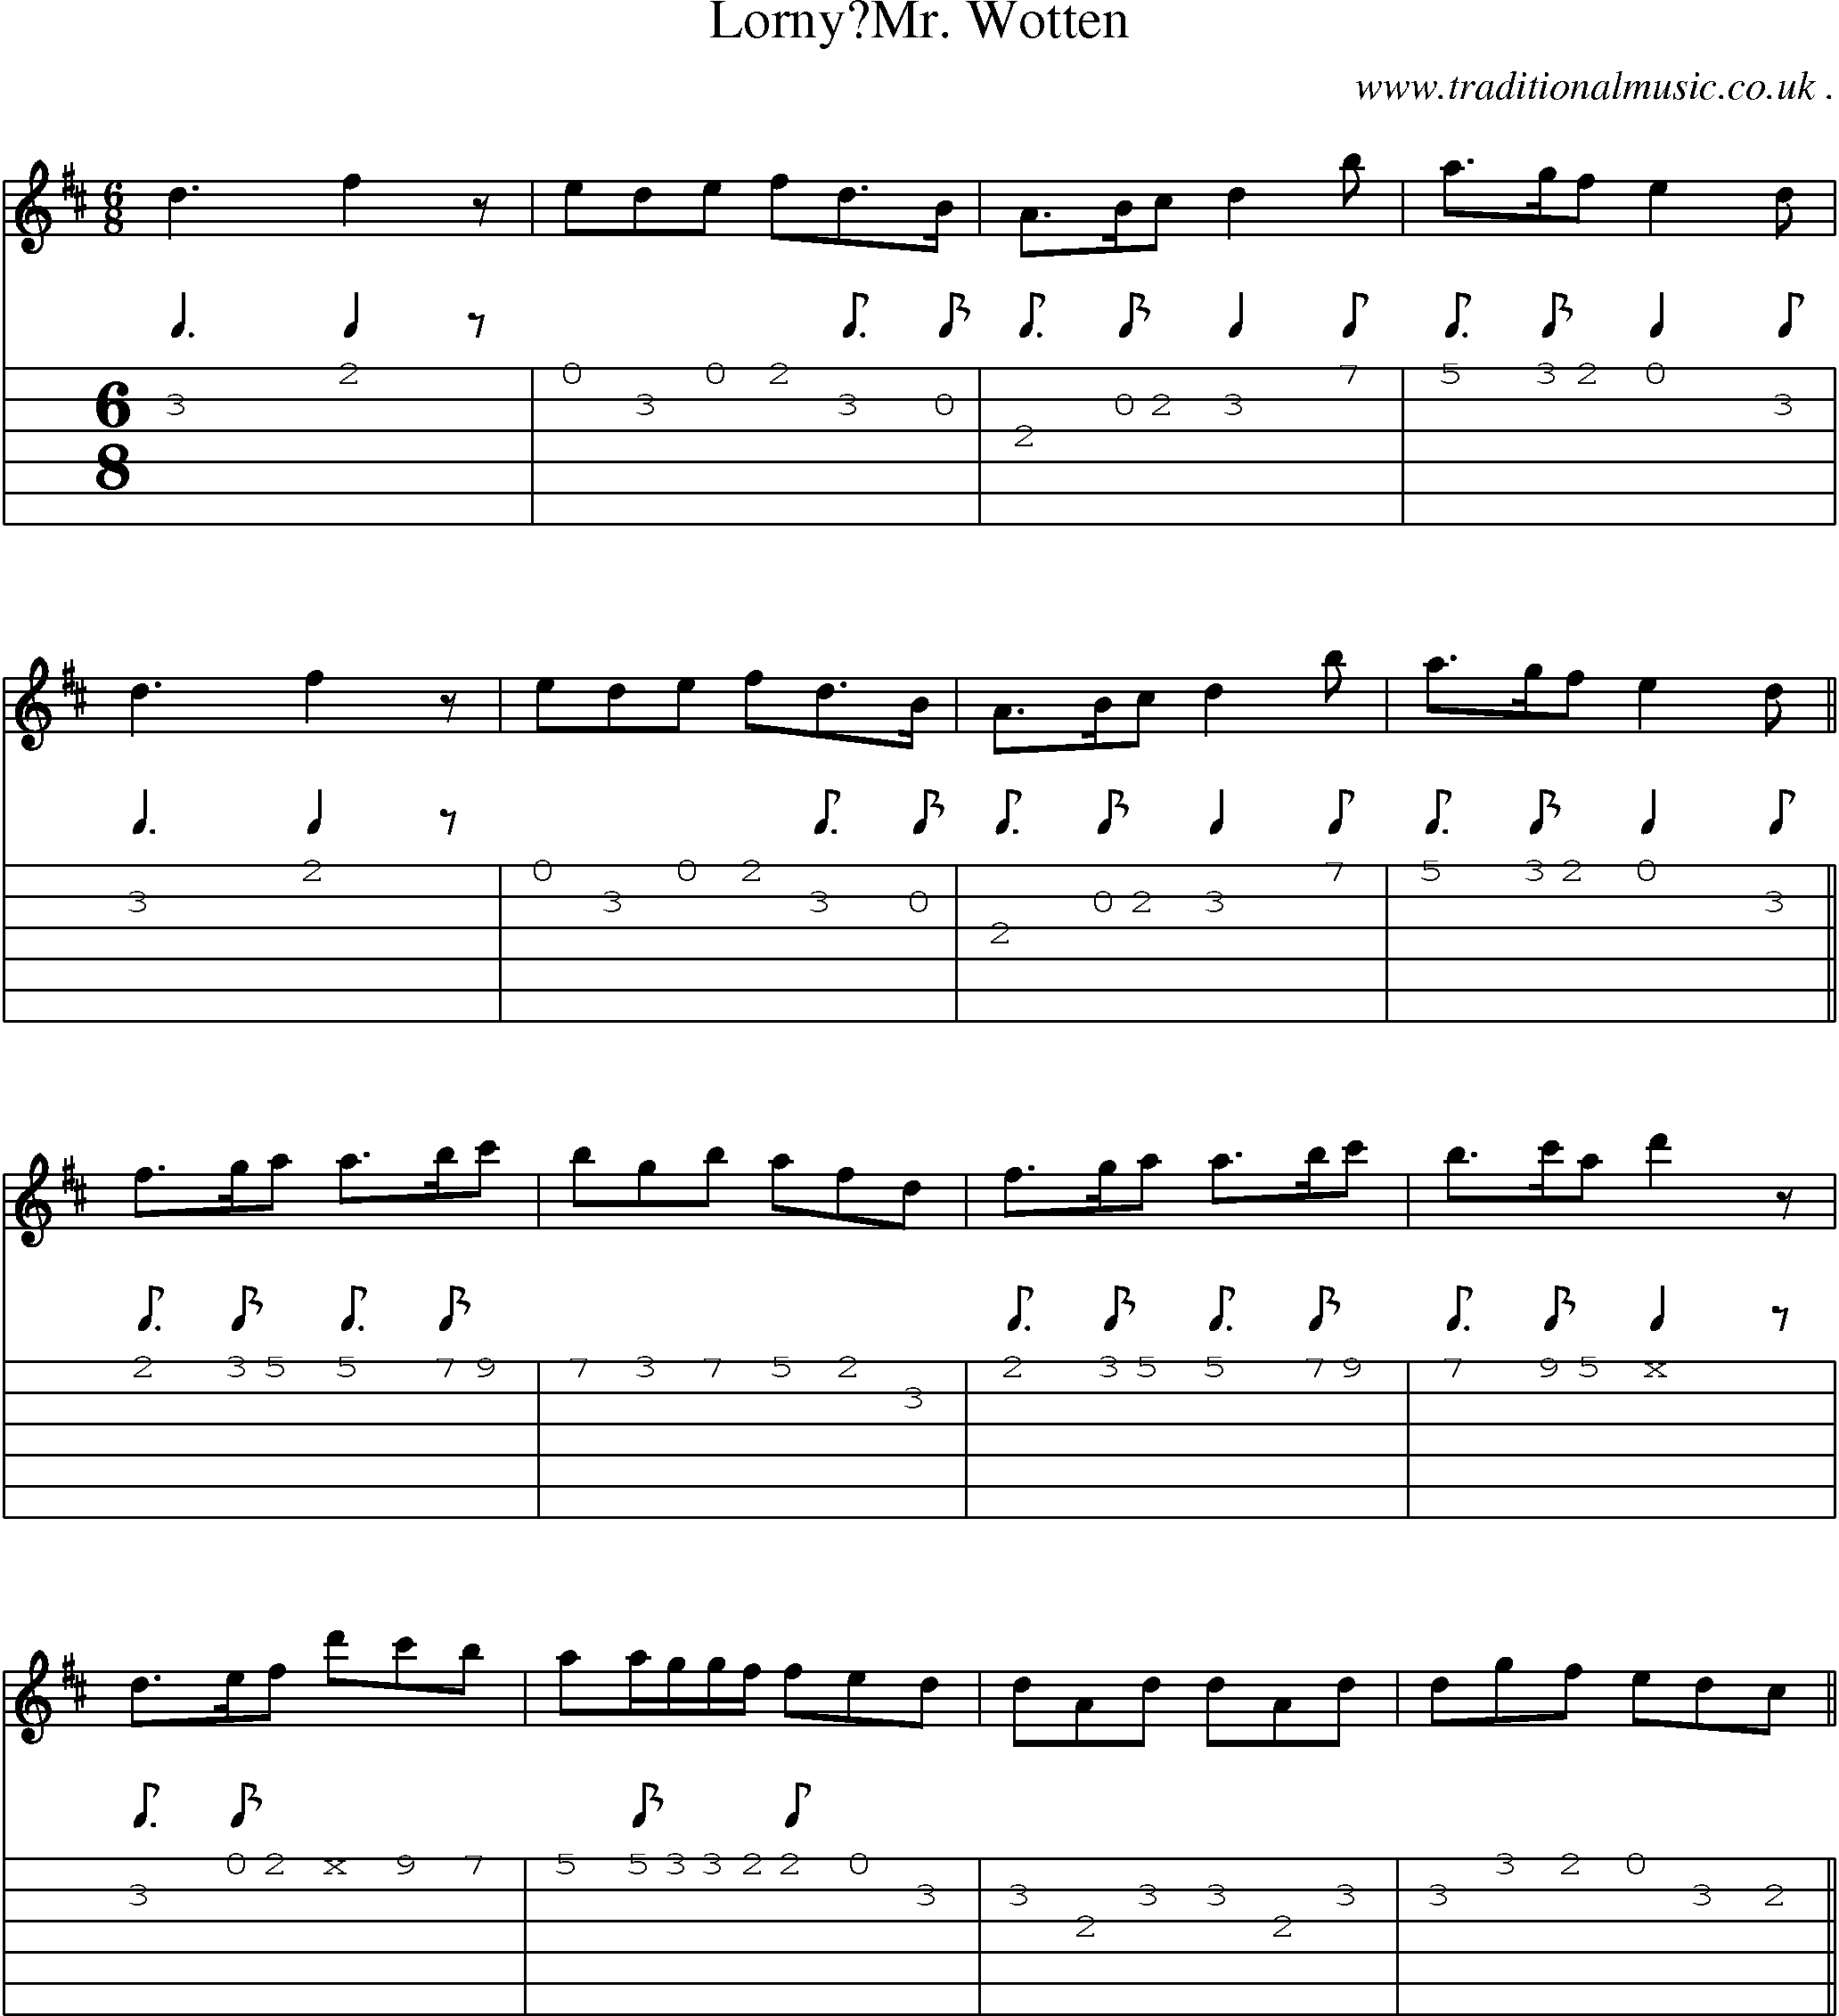 Sheet-Music and Guitar Tabs for Lornymr Wotten